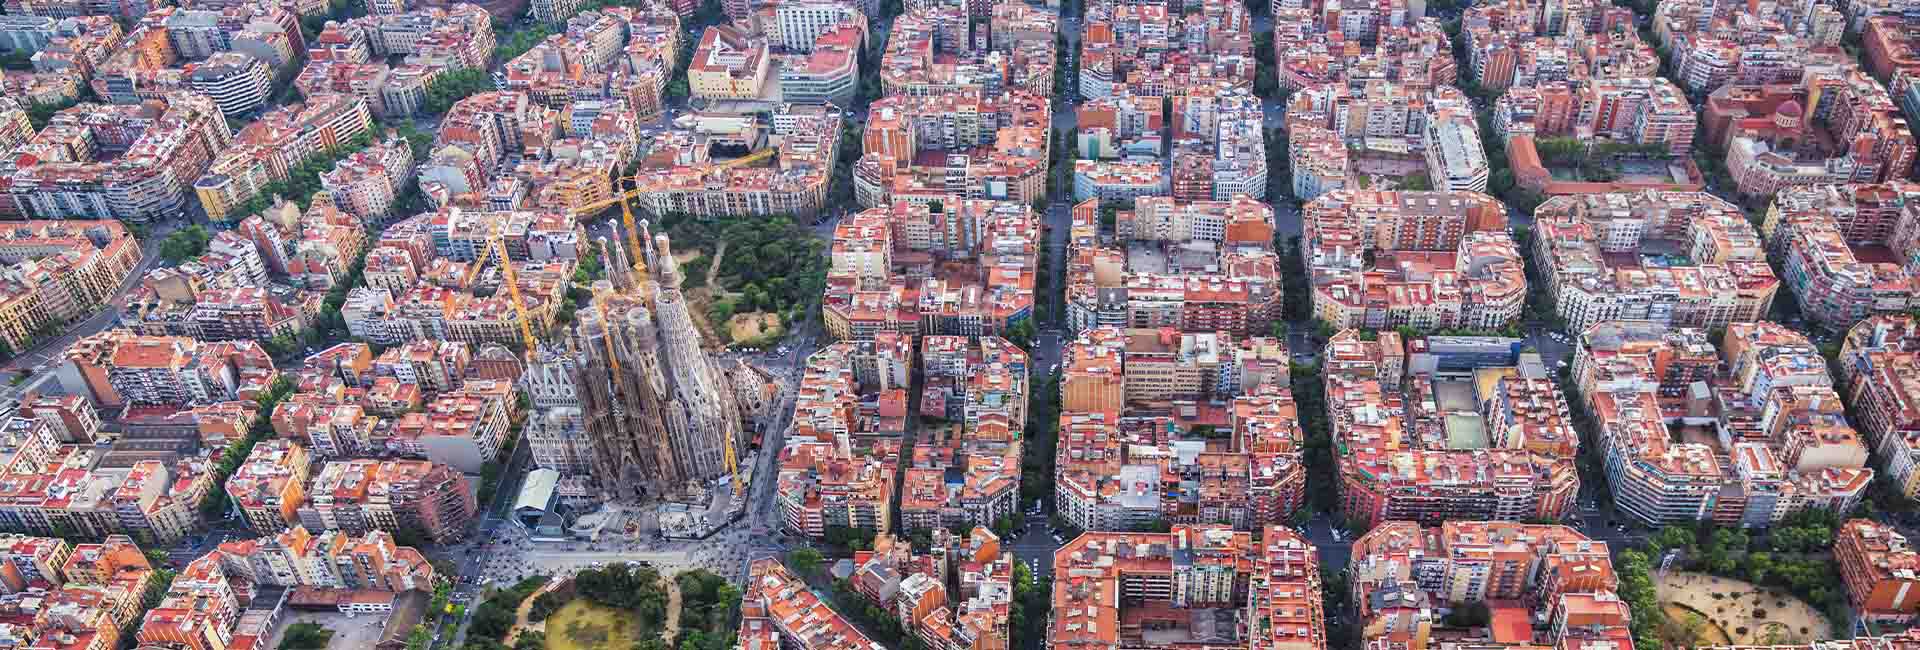 Barcelona's street grid, as seen from above